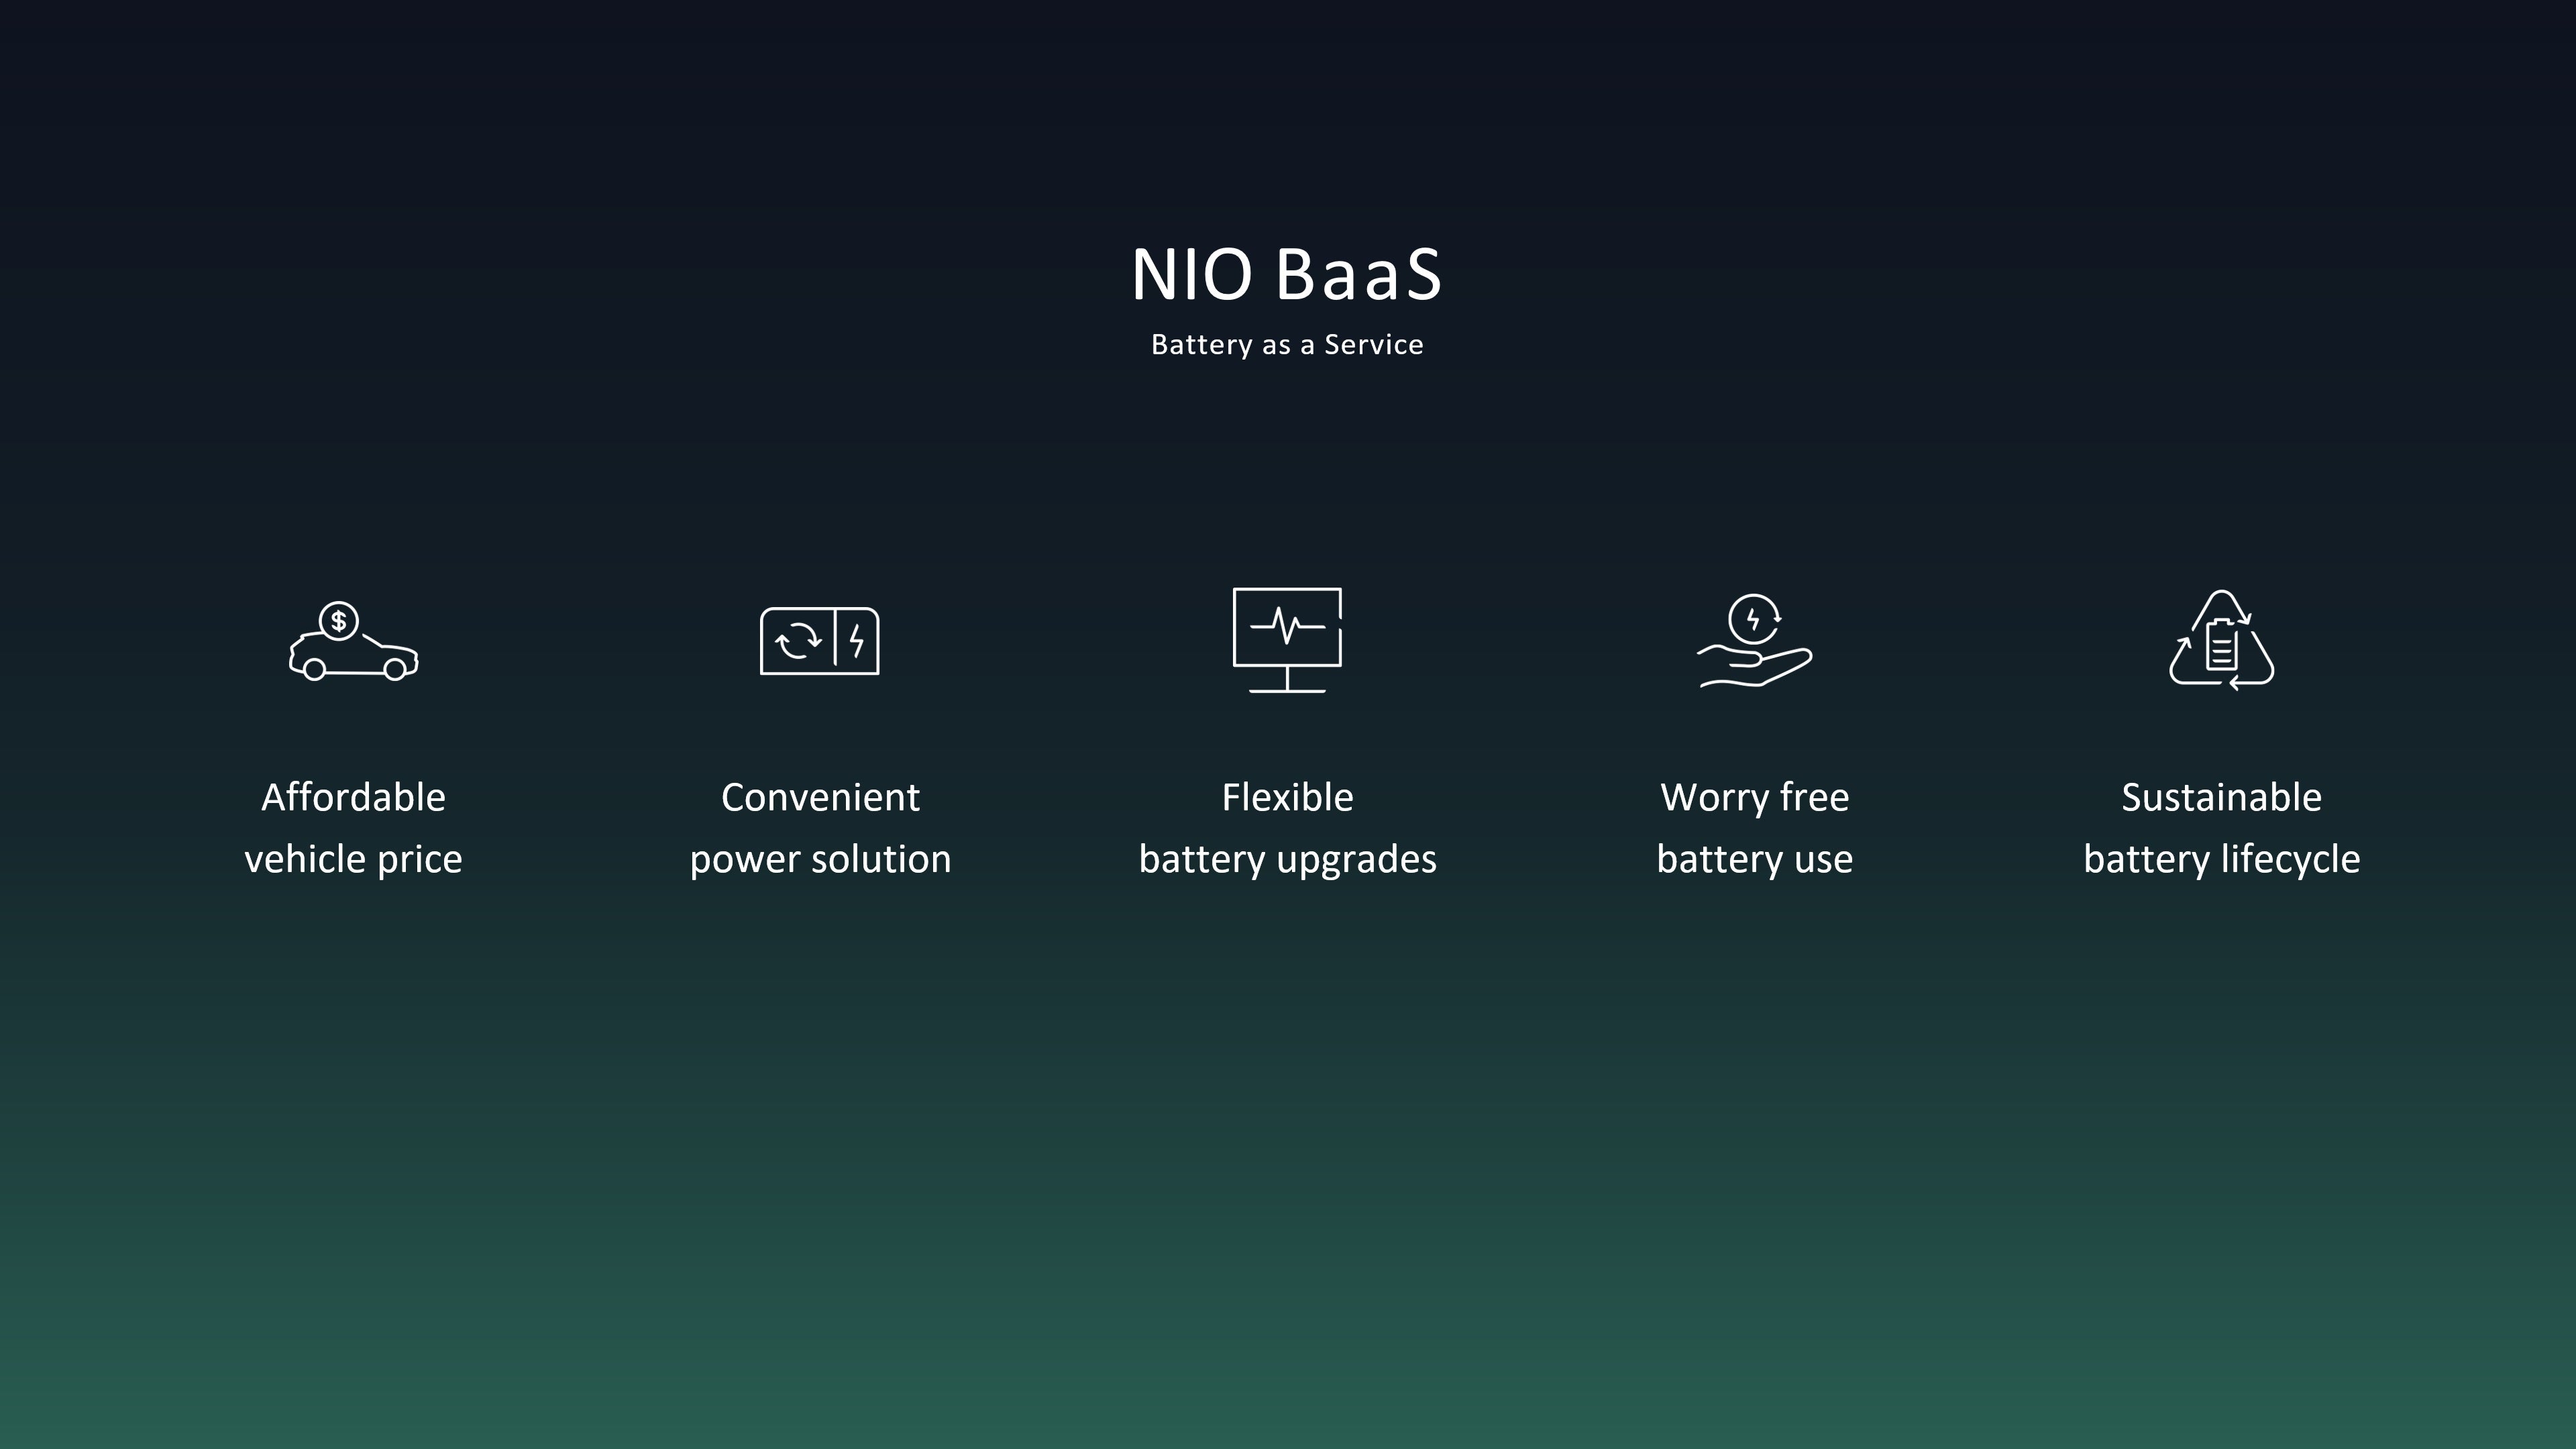 NIO's Battery as a Service (BaaS) is also available in Norway